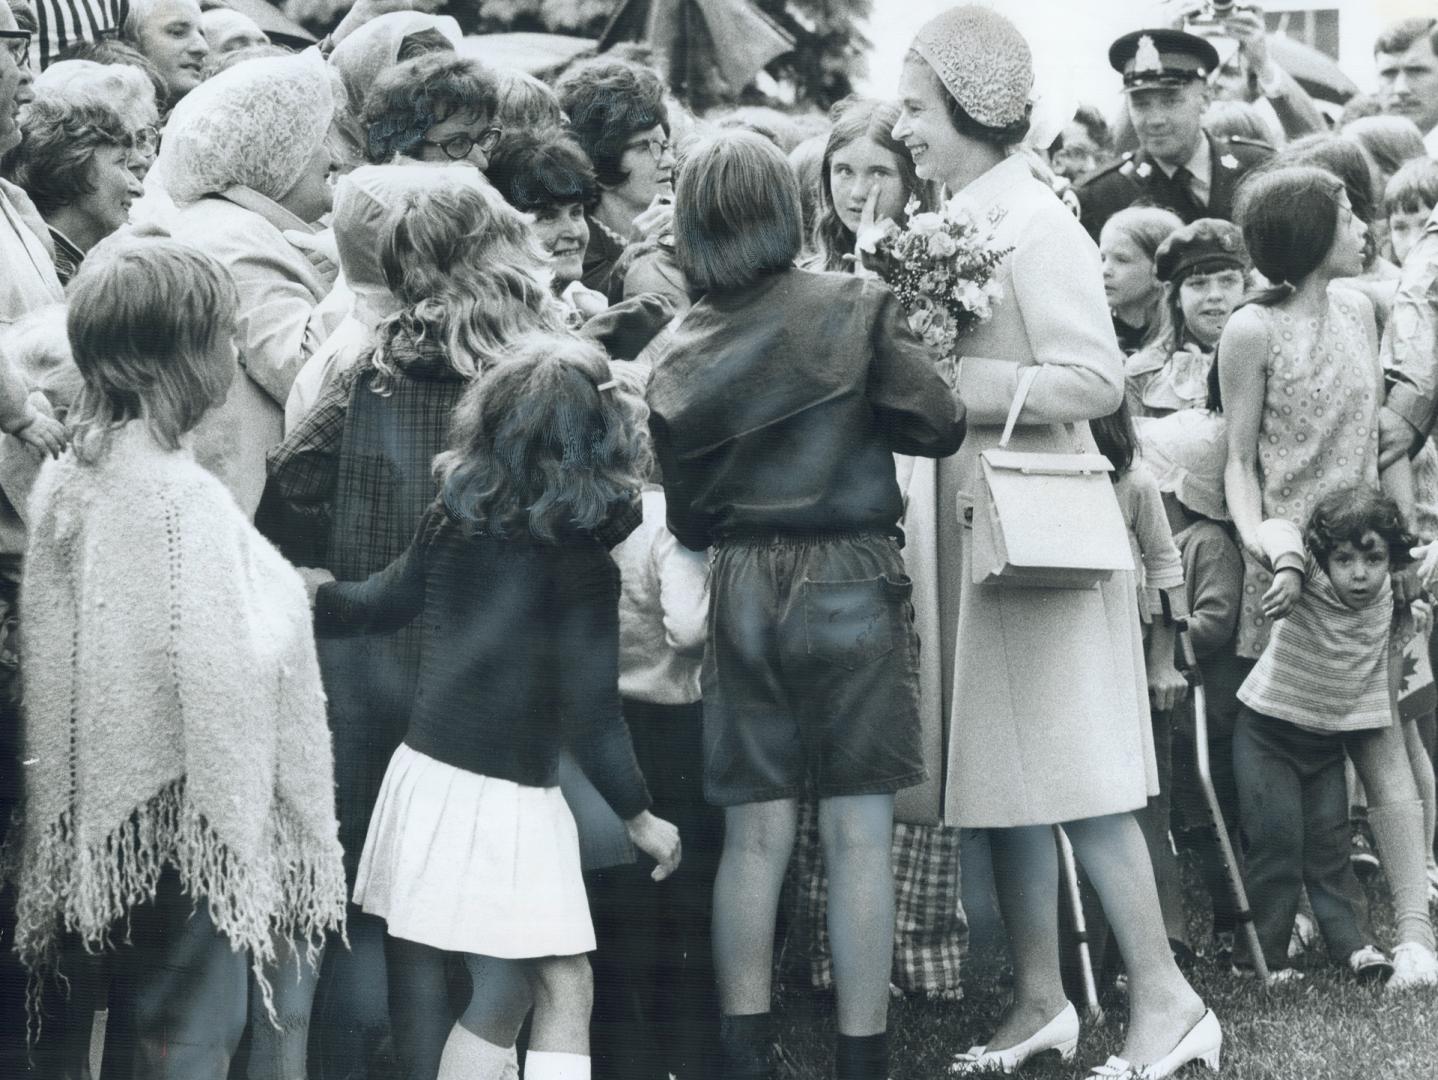 The Queen is surrounded by admirers yesterday in Victoria Park, named for her great-great-grandmother, in London, Ontario. Estimated 100,000 persons l(...)